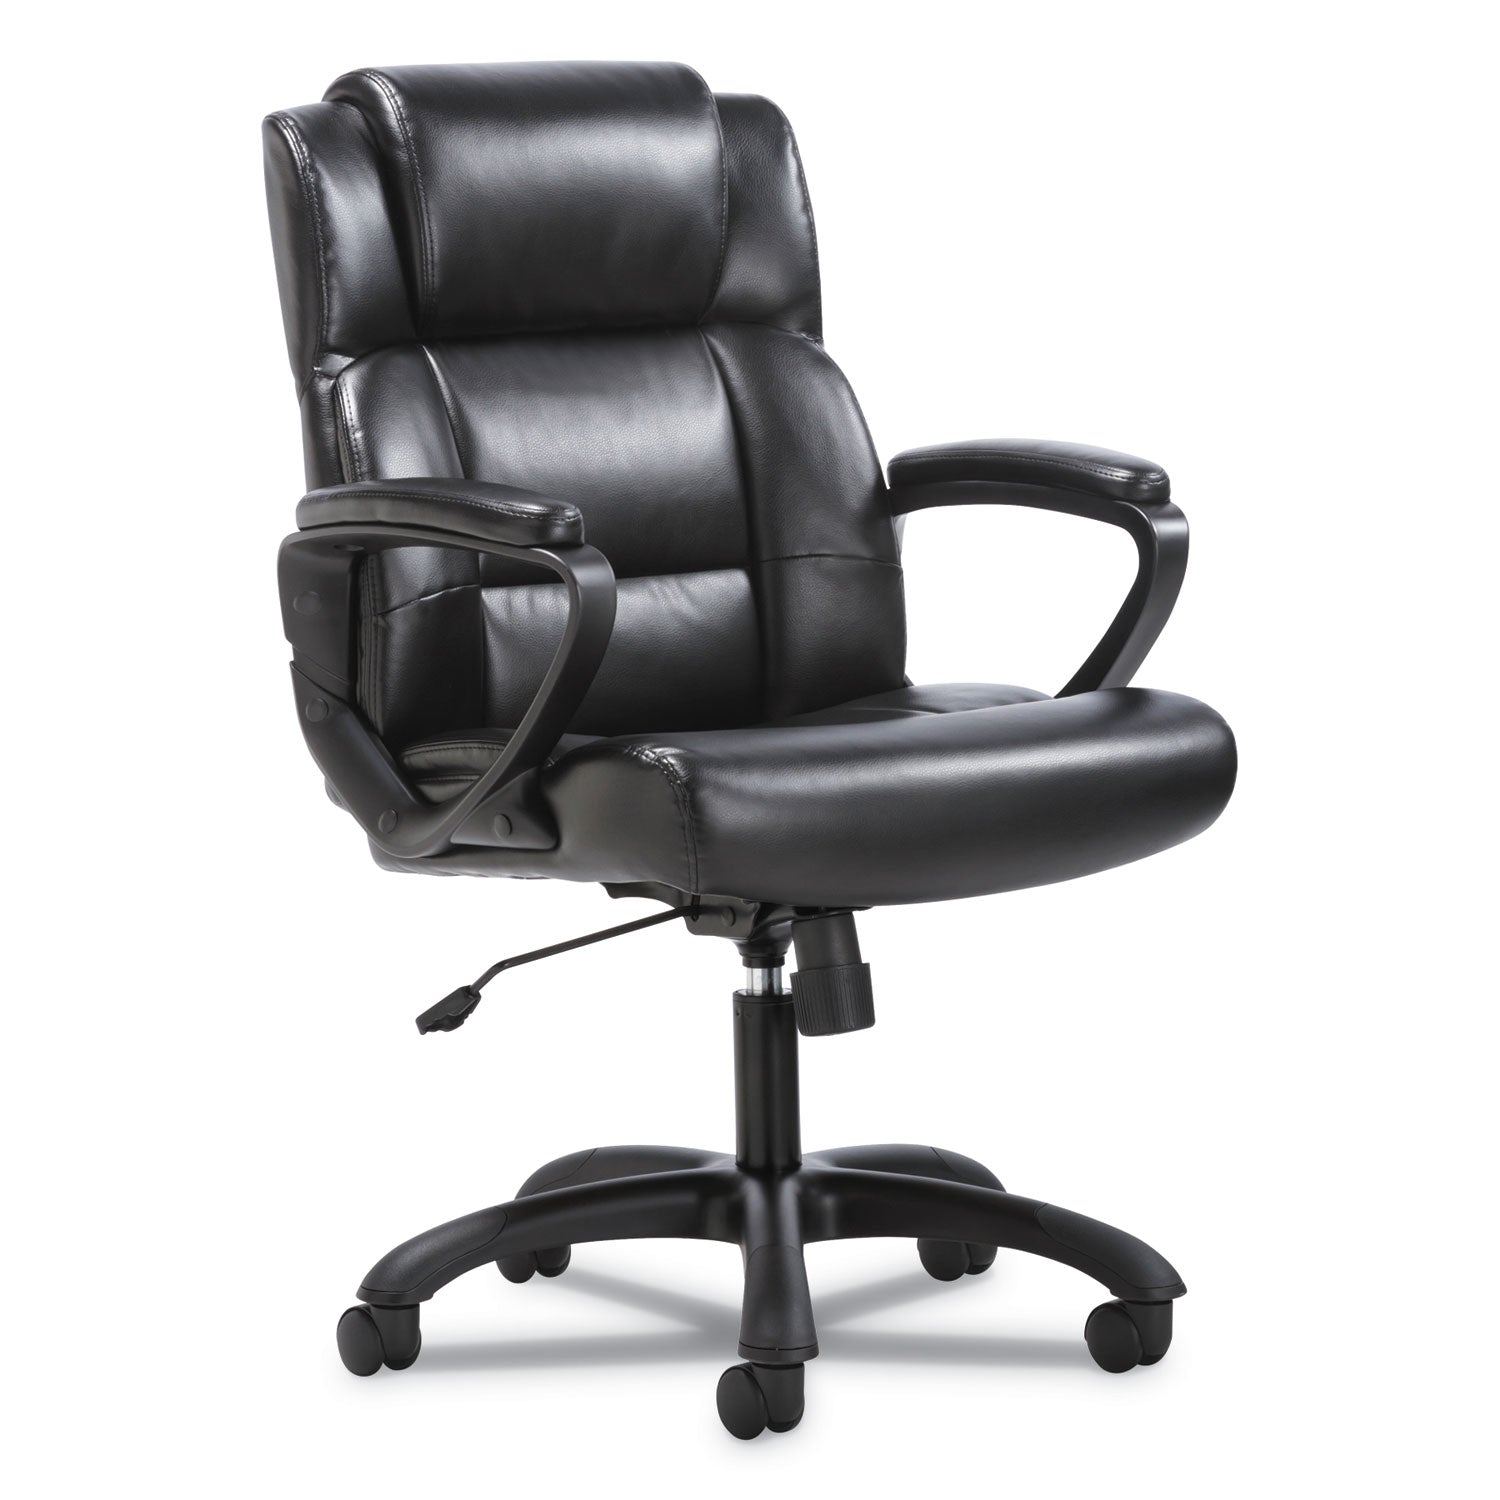 mid-back-executive-chair-supports-up-to-225-lb-19-to-23-seat-height-black_bsxvst305 - 1